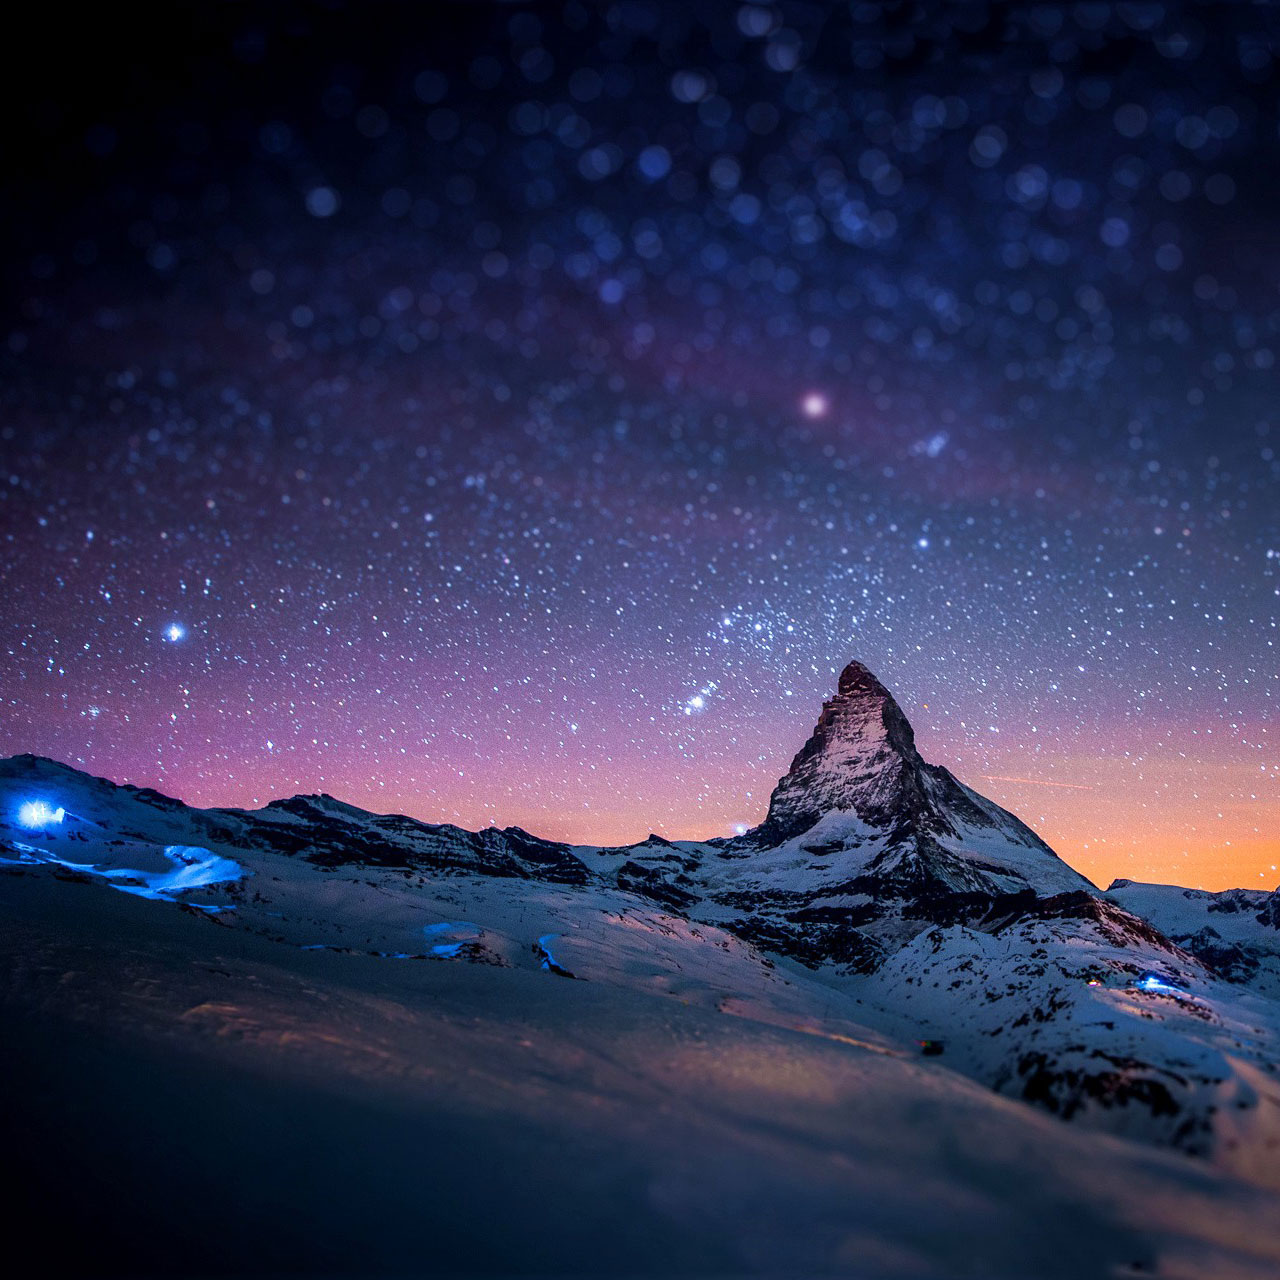 Stars And Snow Night In The Alps Samsung Galaxy Tab 10 wallpapers 1280x1280